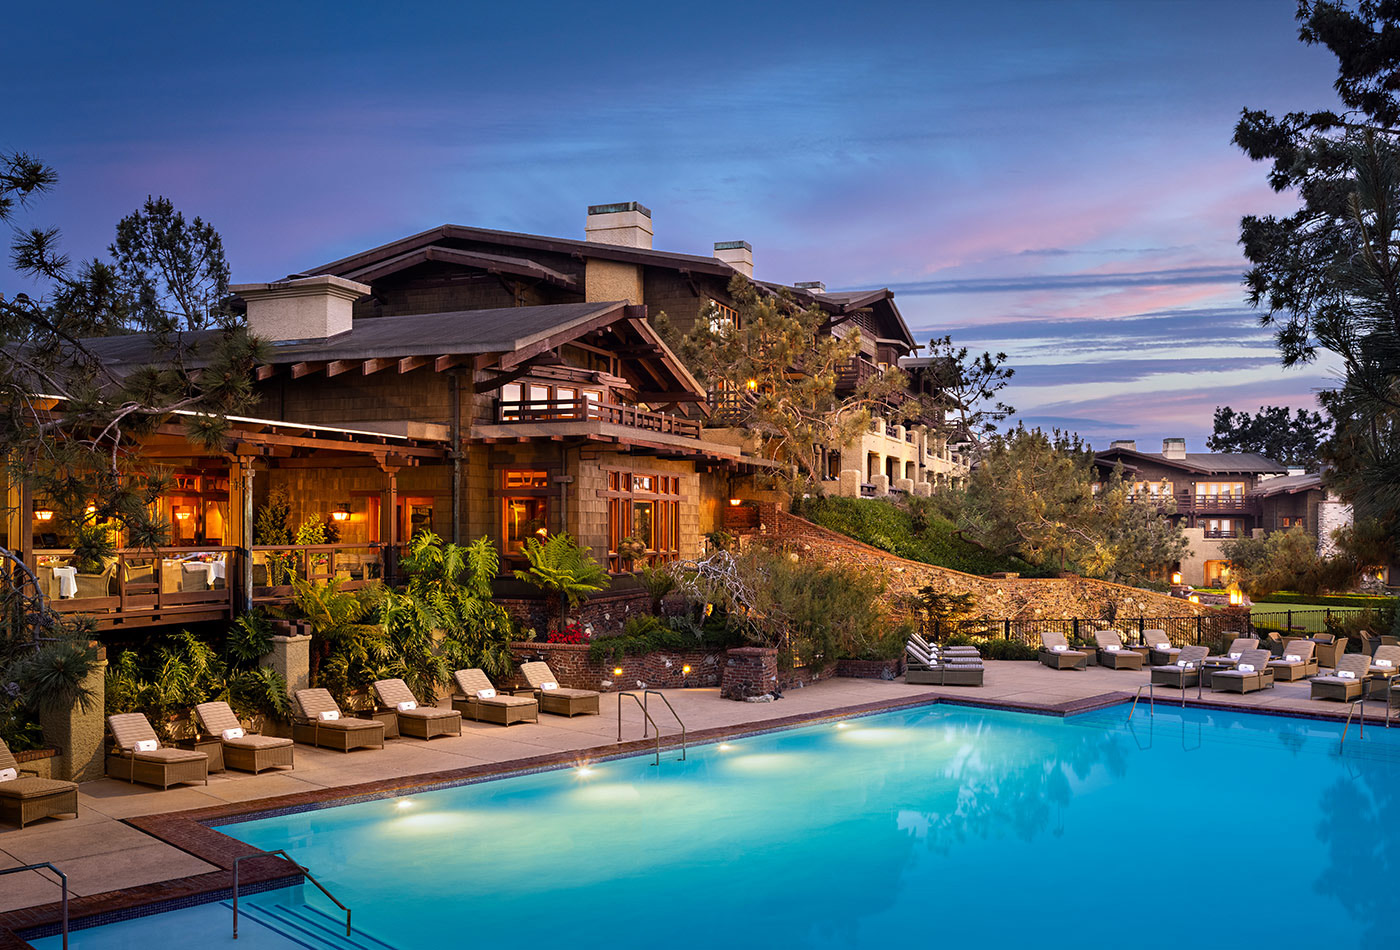 Image: The Lodge at Torrey Pines Joins the Hotel Employee Rate Travel Program